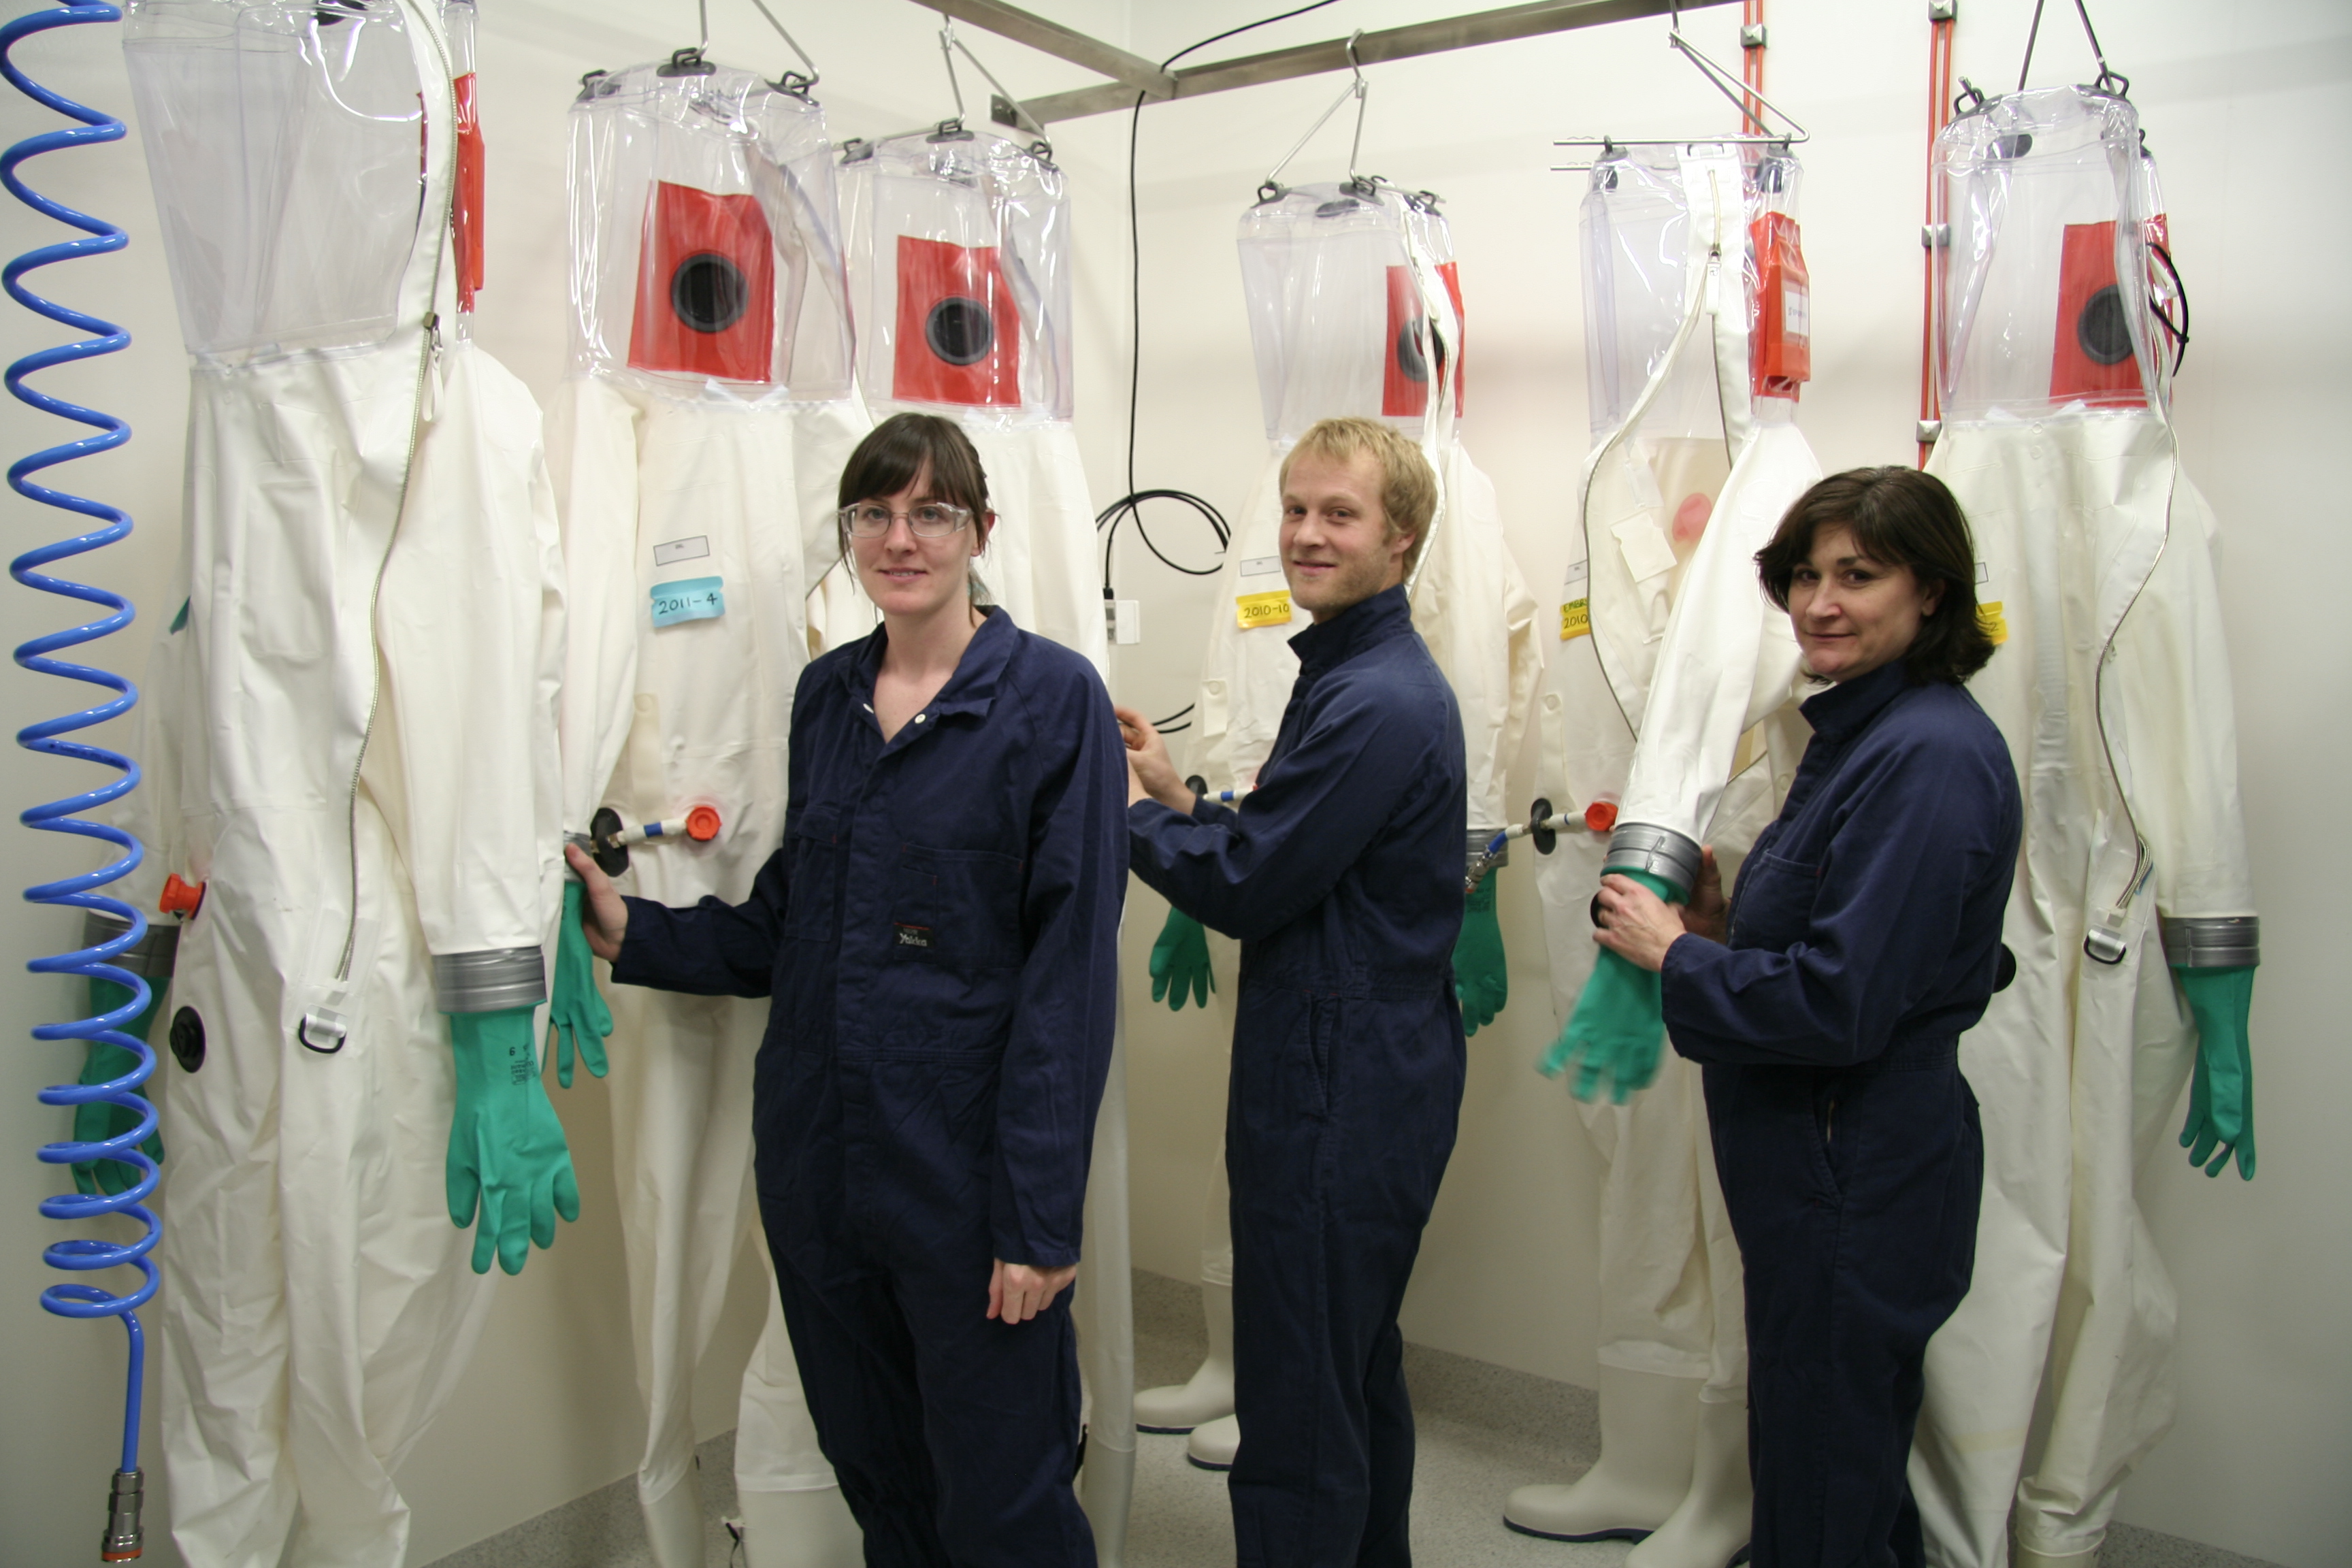 Three people wearing blue overalls standing infront of encapsulated suits that are hanging from hooks